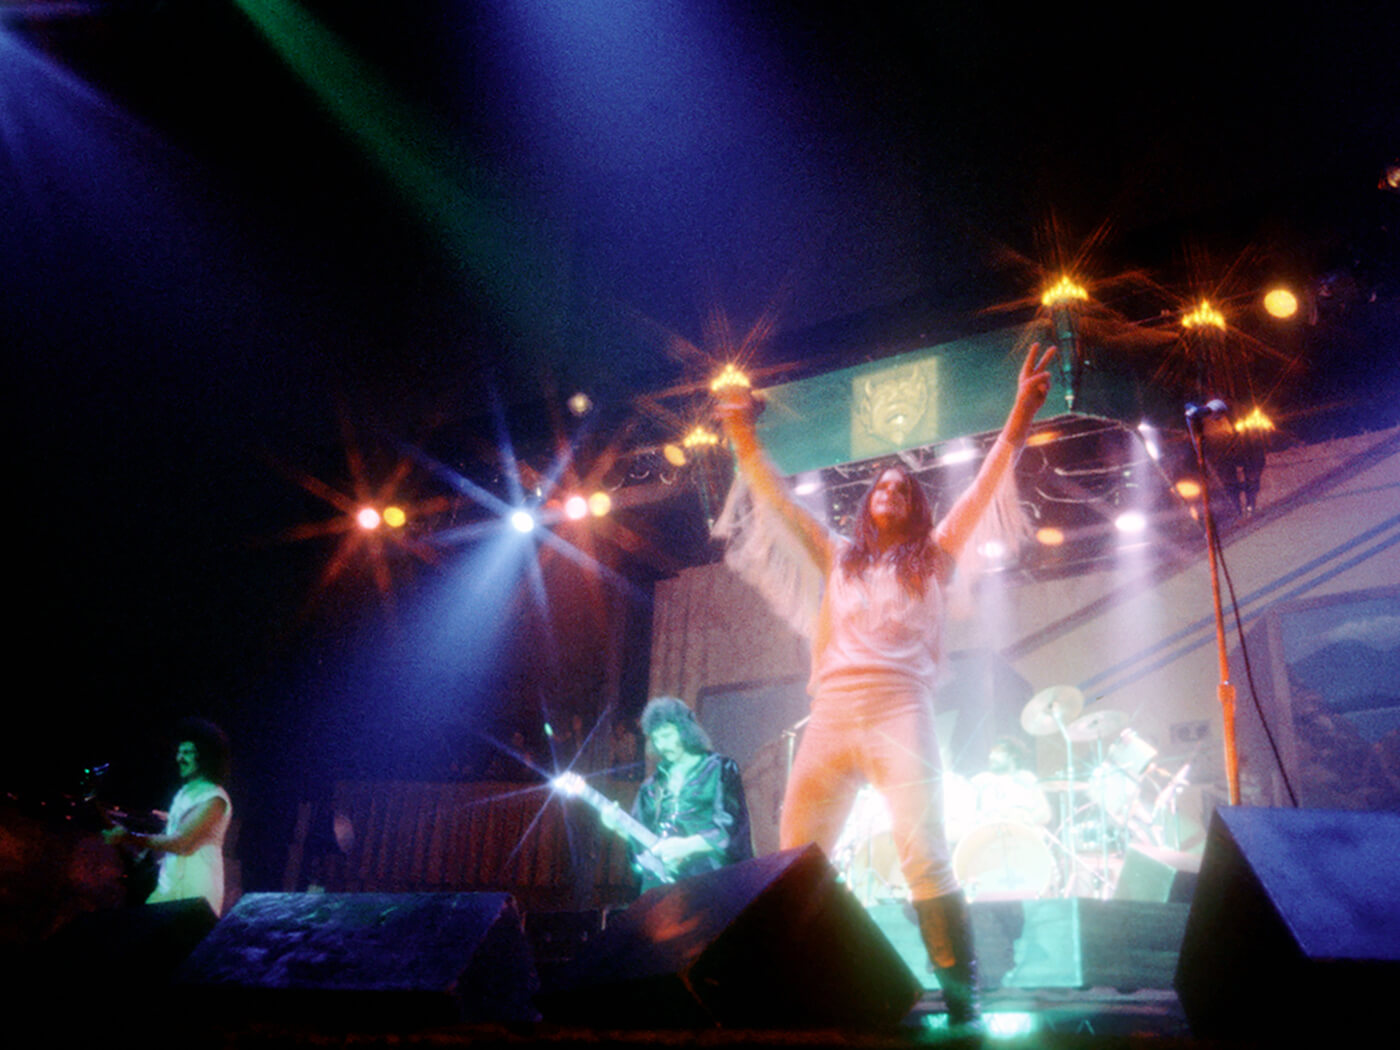 Black Sabbath performing in 1970, photo by Michael Ochs Archives/Getty Images